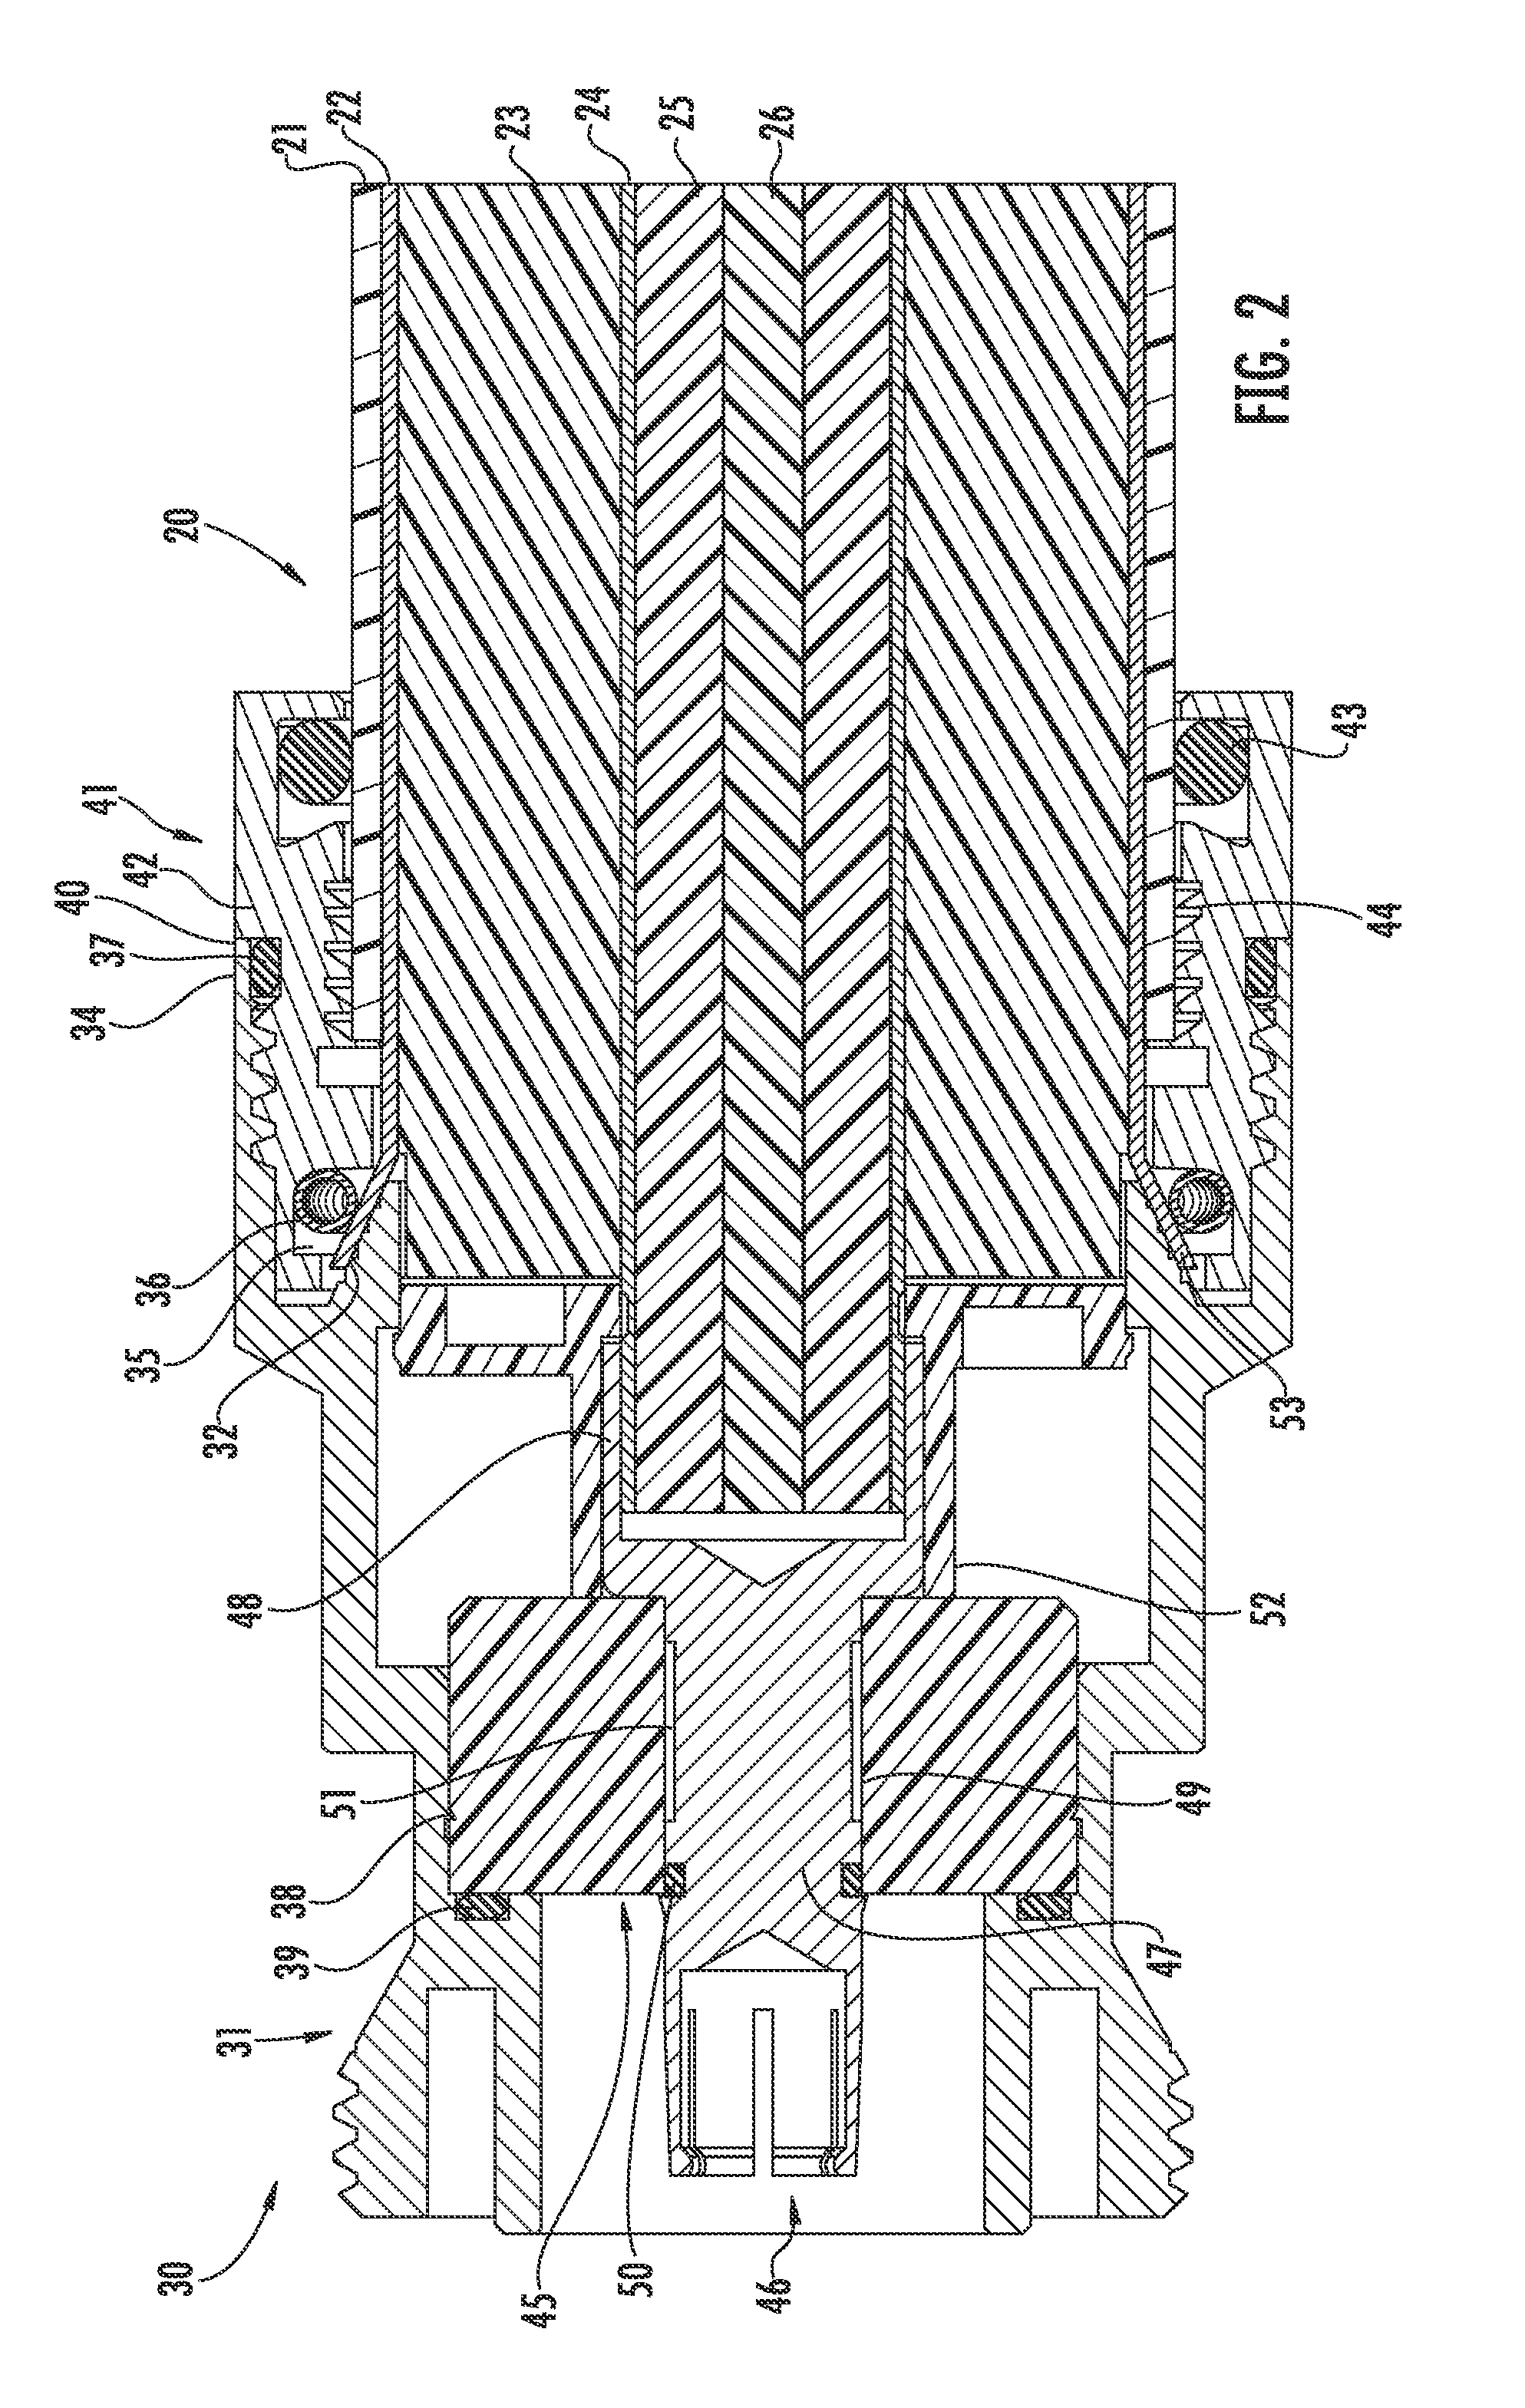 Connector for coaxial cable having rotational joint between insulator member and center contact and associated methods